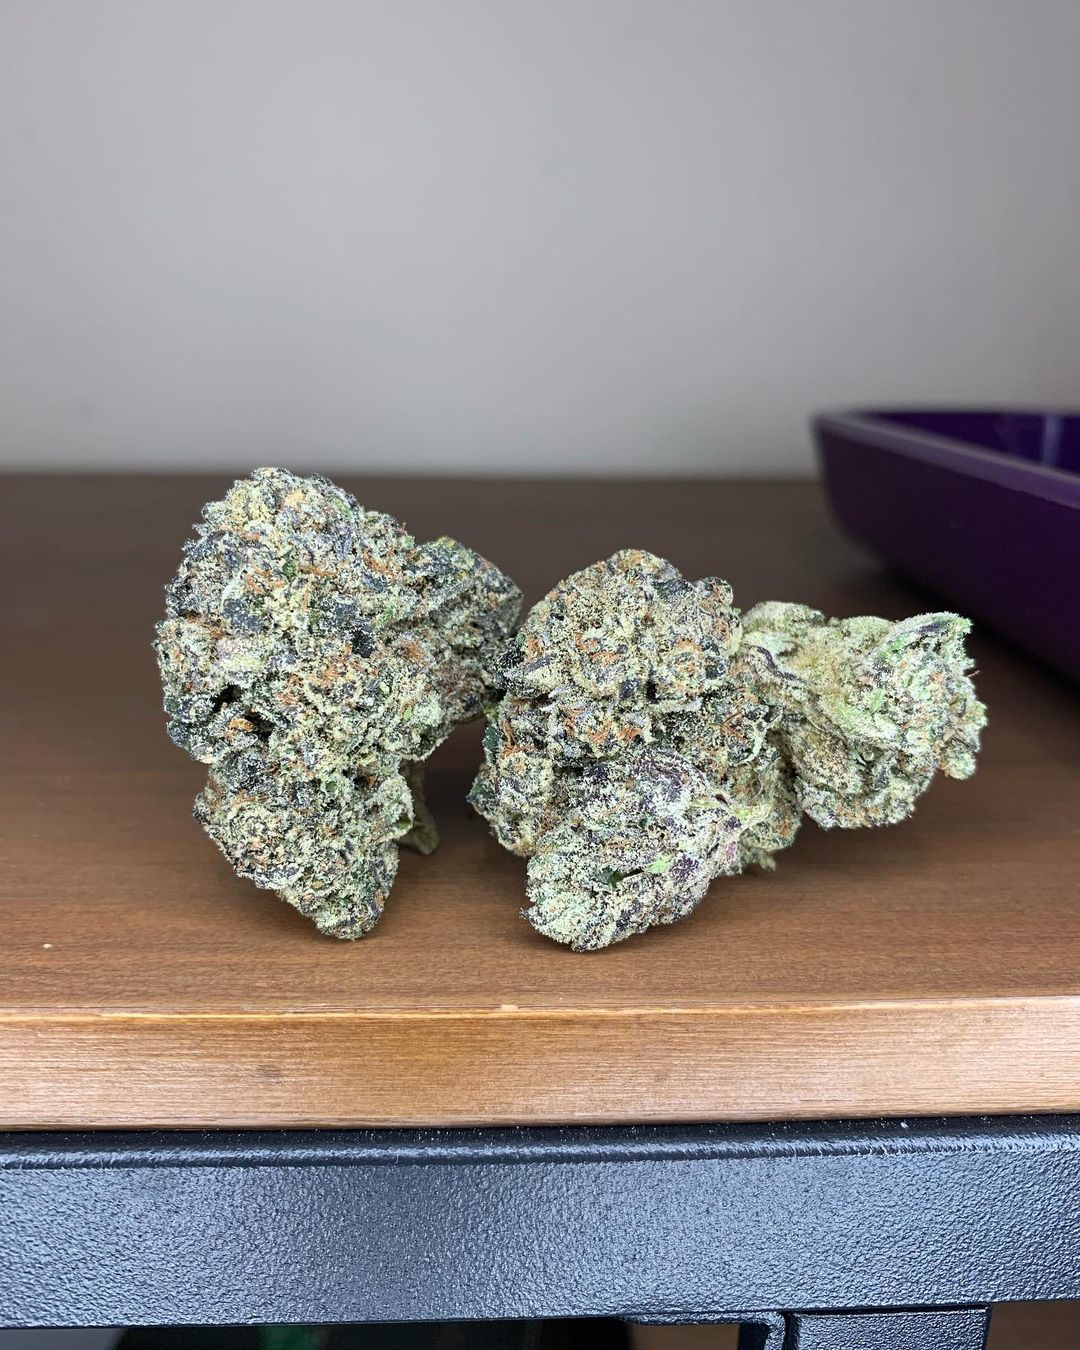 pink certz by eastwood gardens cultivar review by pnw_chronic